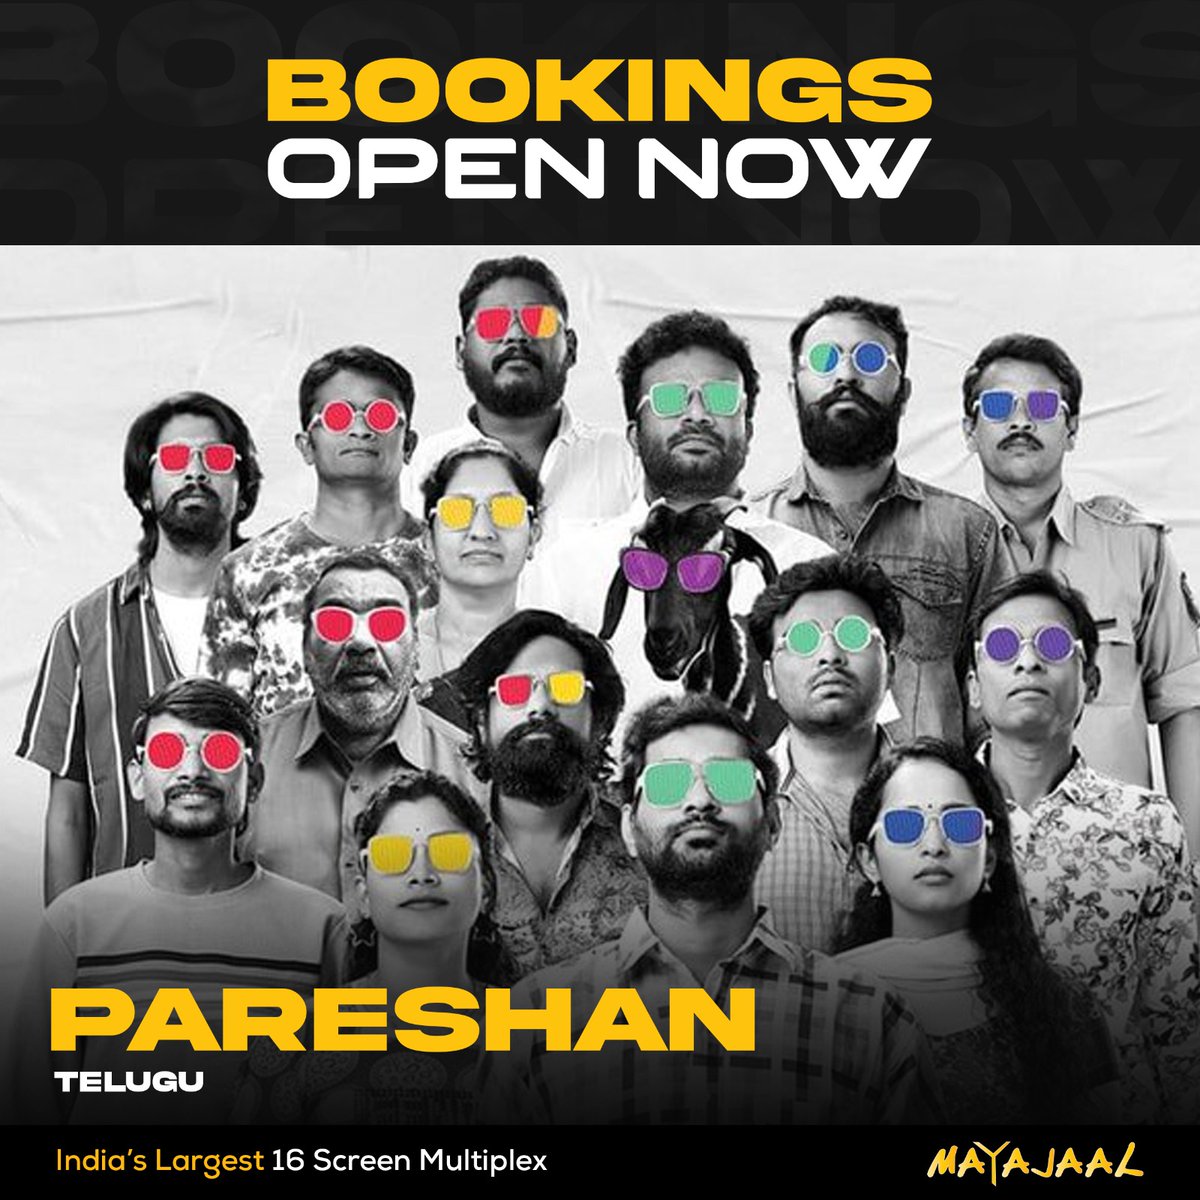 Get ready to laugh your heart out with this hilarious comedy drama!

Bookings open for #Pareshan at #Mayajaal
🎟️bit.ly/3sVdbqD

@RanaDaggubati @iamThiruveeR #PareshanReleaseOnJune2nd